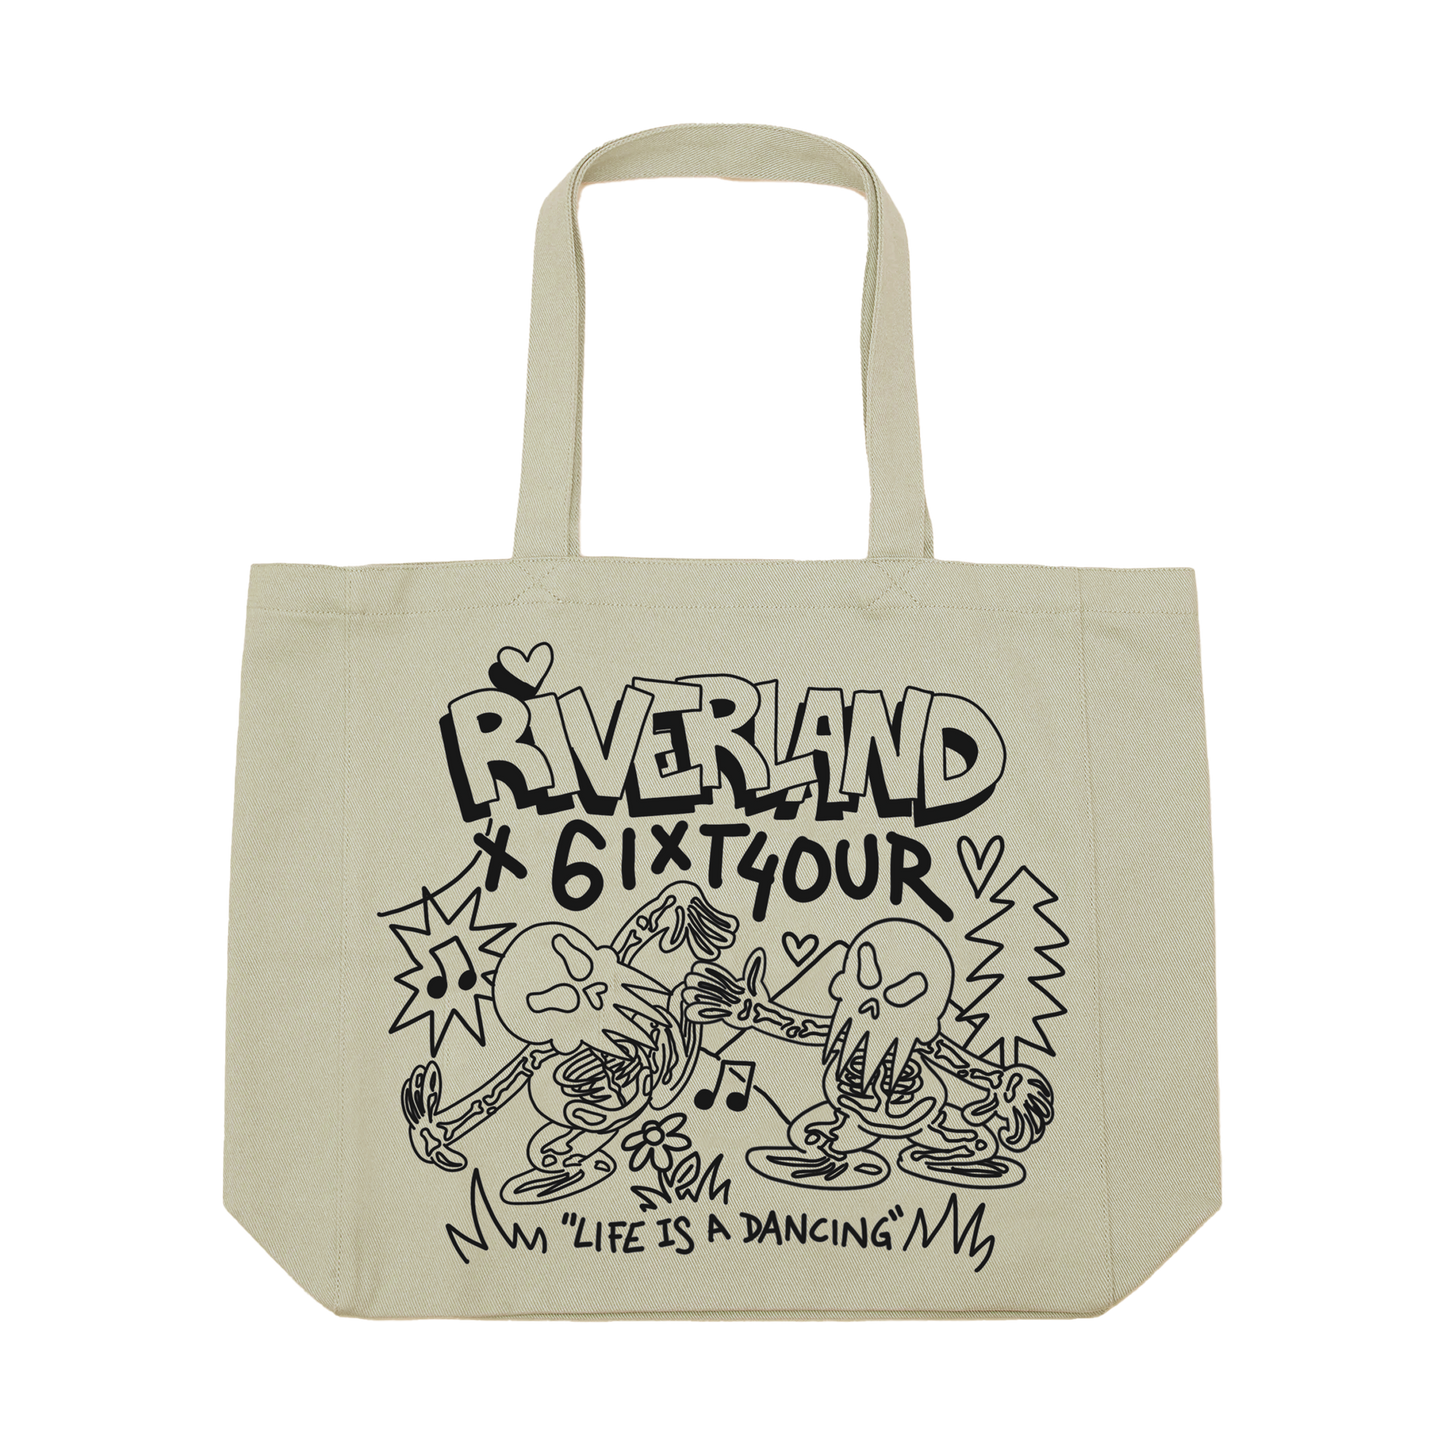 Bolsa tipo Tote Riverland x 6ixt4our